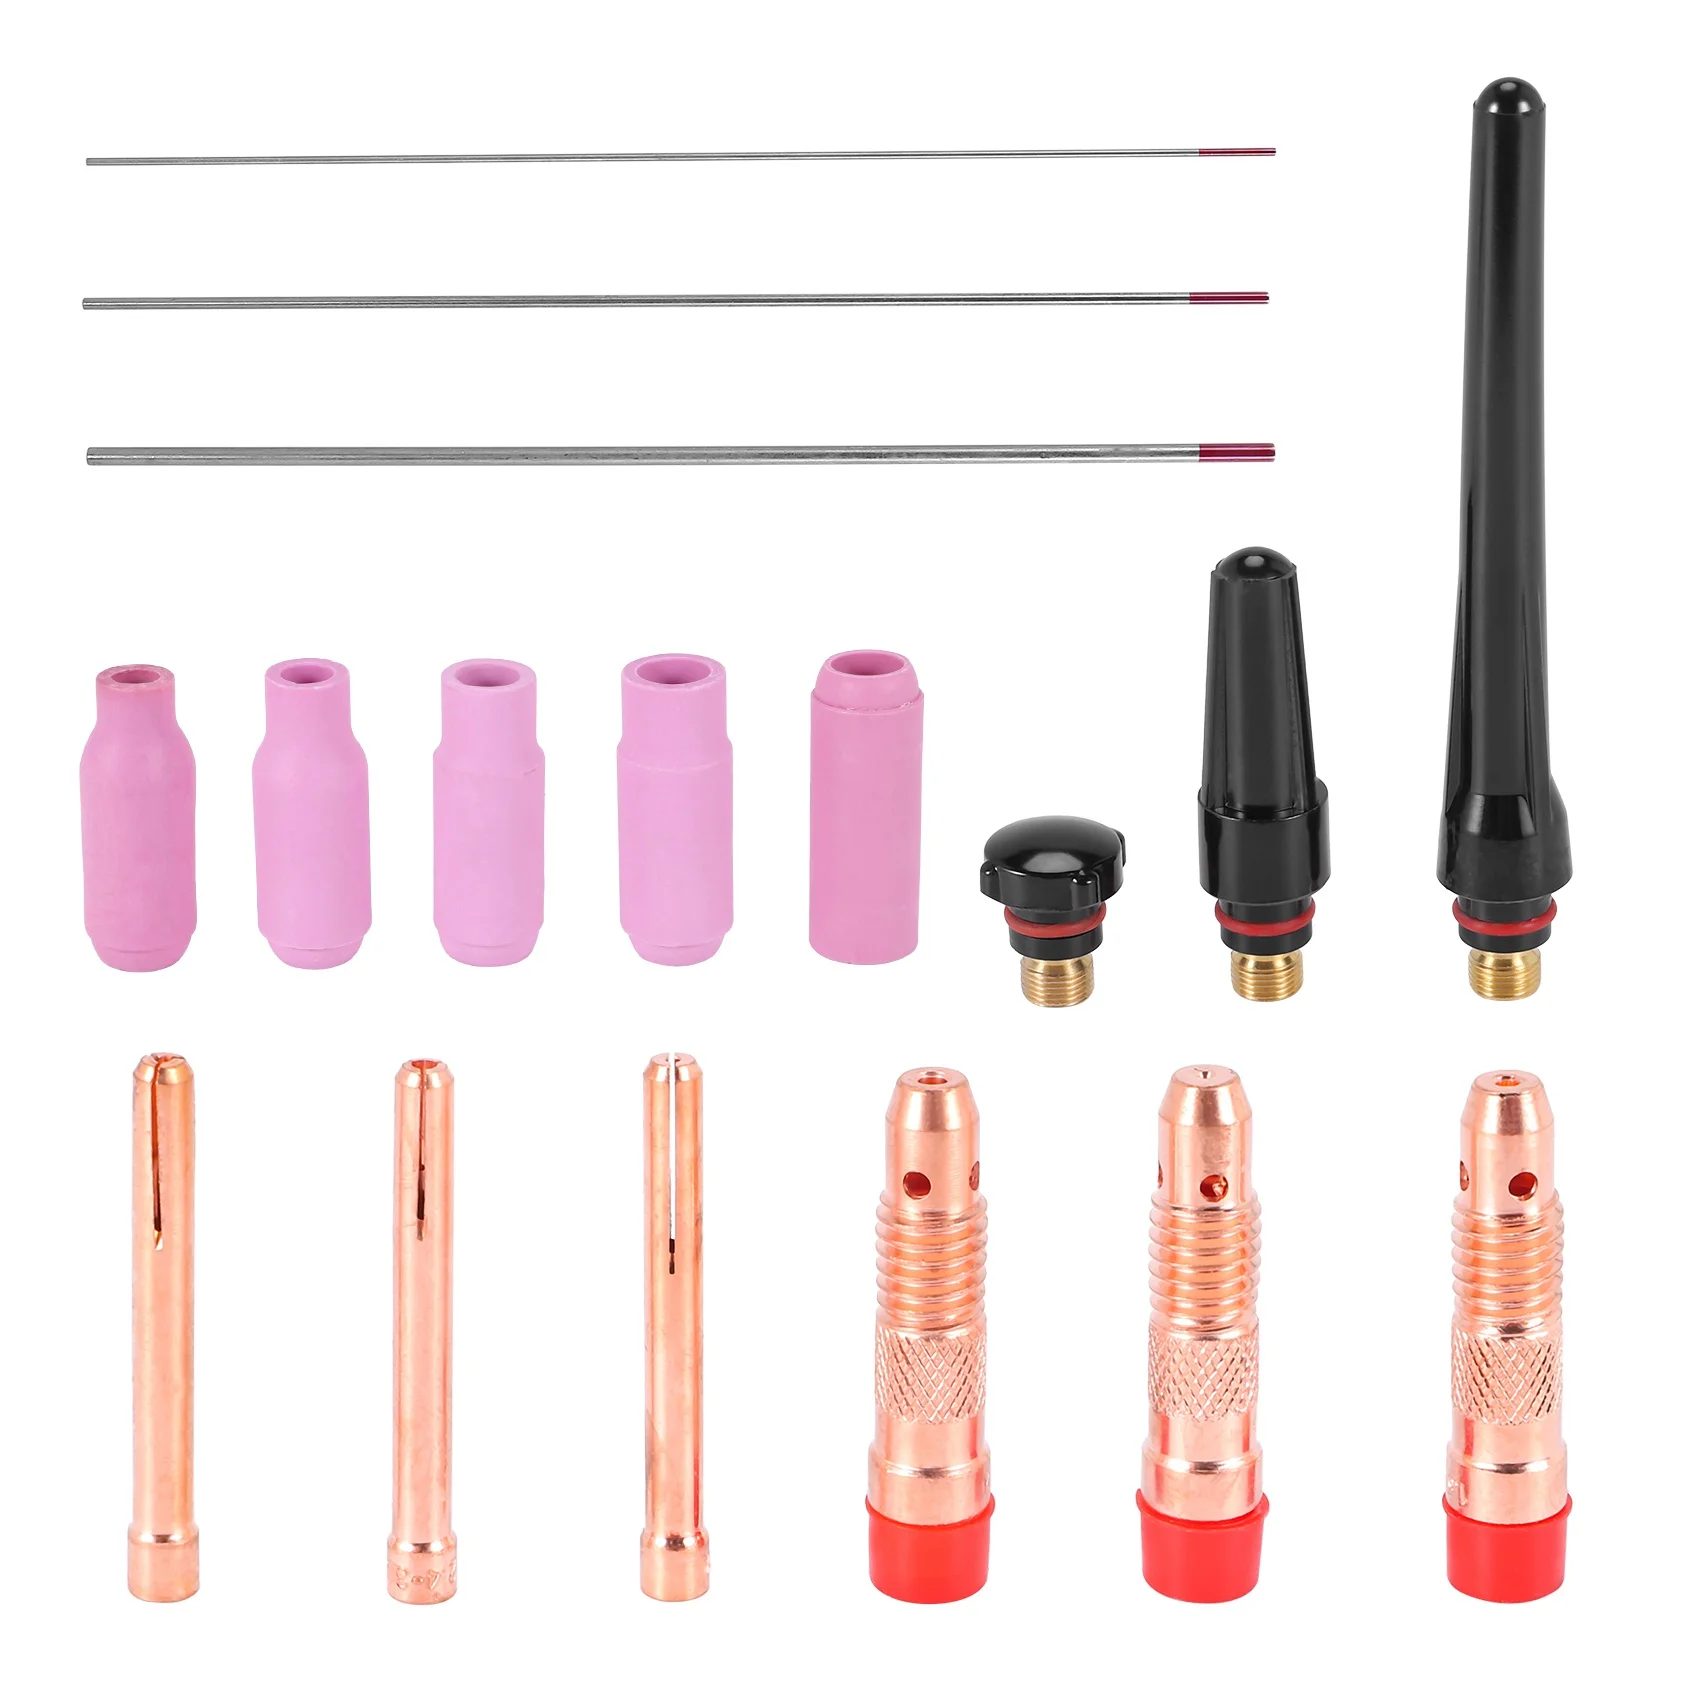 

17Pcs Welders Welding Torch Tig Cup Collet Body Nozzle Kit Tungsten Electrode For Wp-17/18/26 Tig Welding Torch